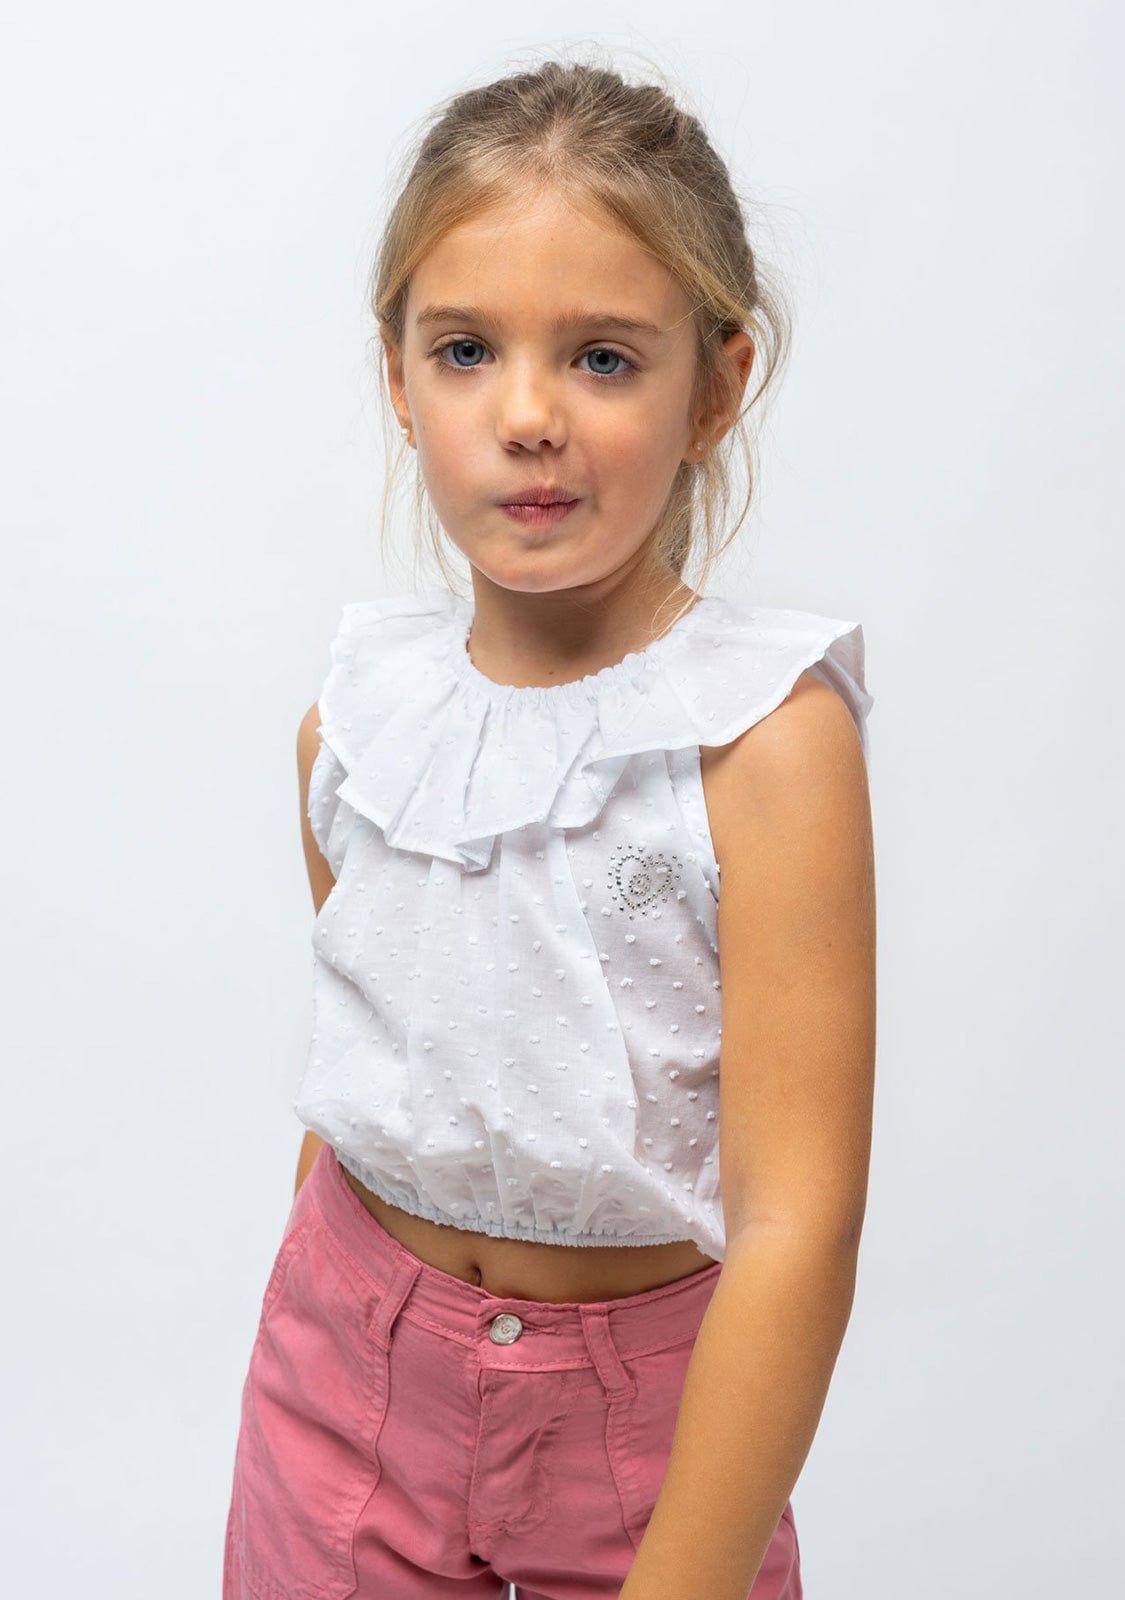 CONGUITOS TEXTIL Clothing Girl's Pink Culotte